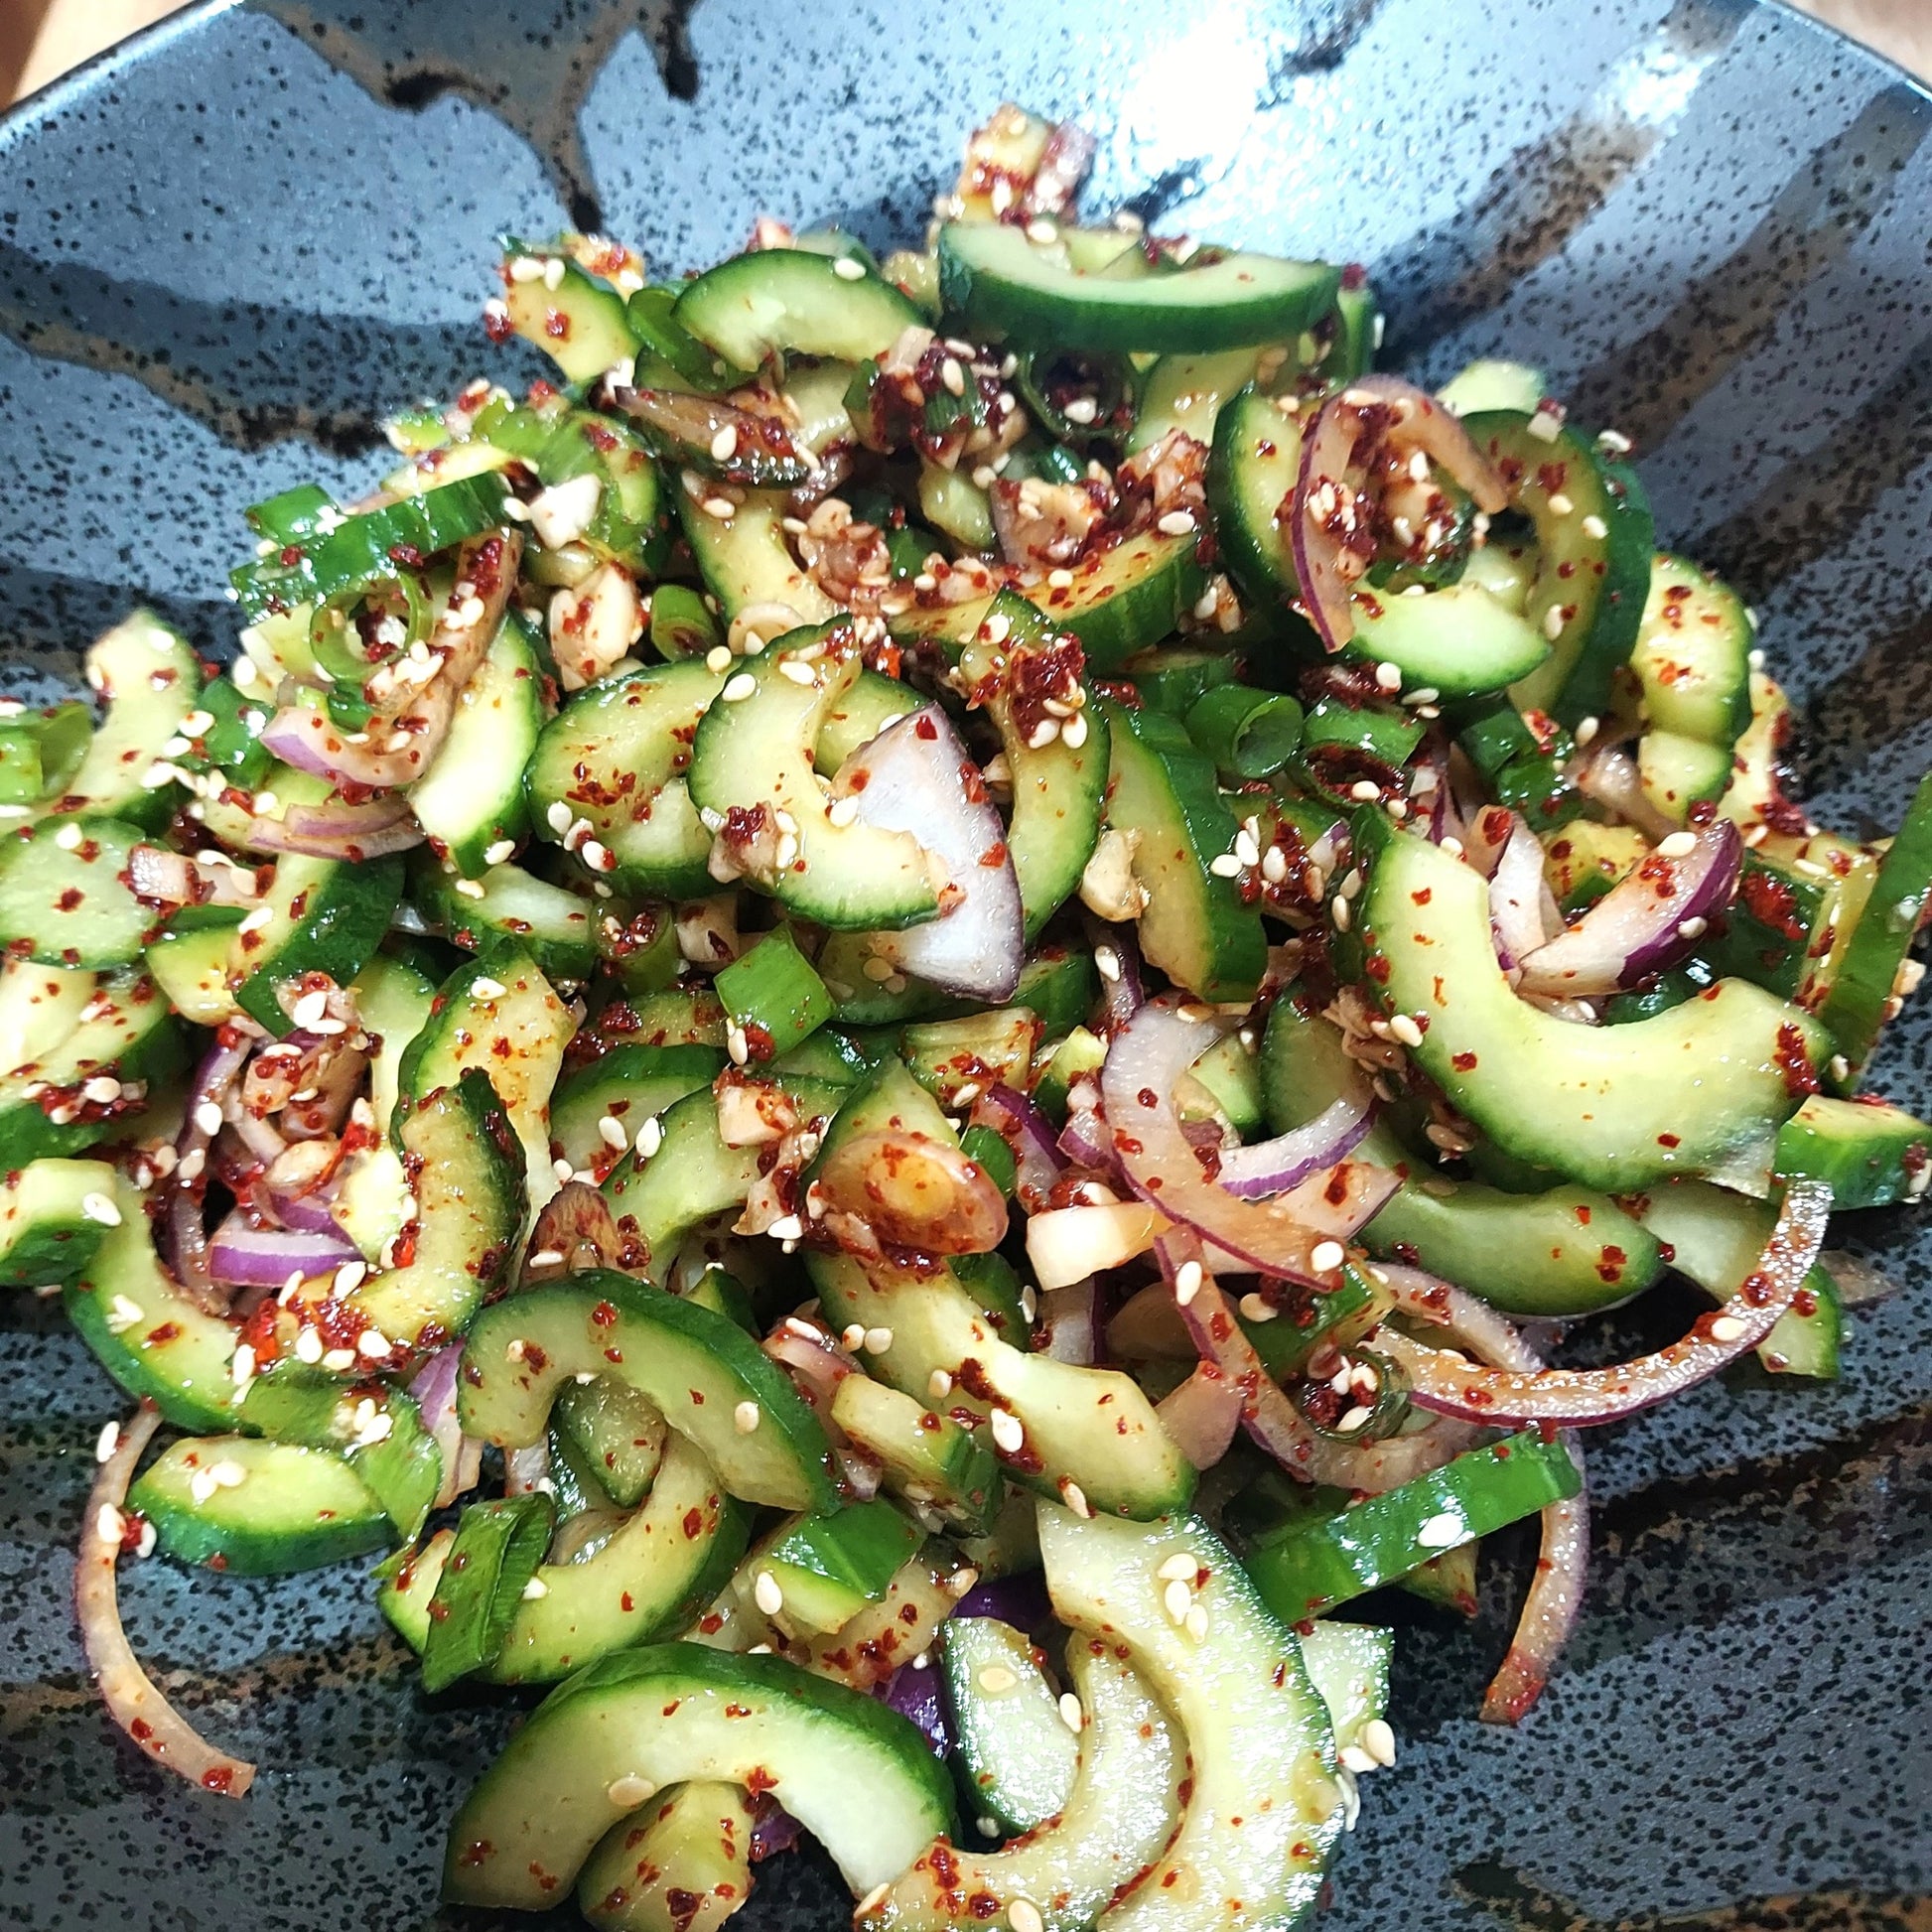 Sliced and seaded lebanese cucumbers mixed with sesame chilli condiment for a spicy fresh salad